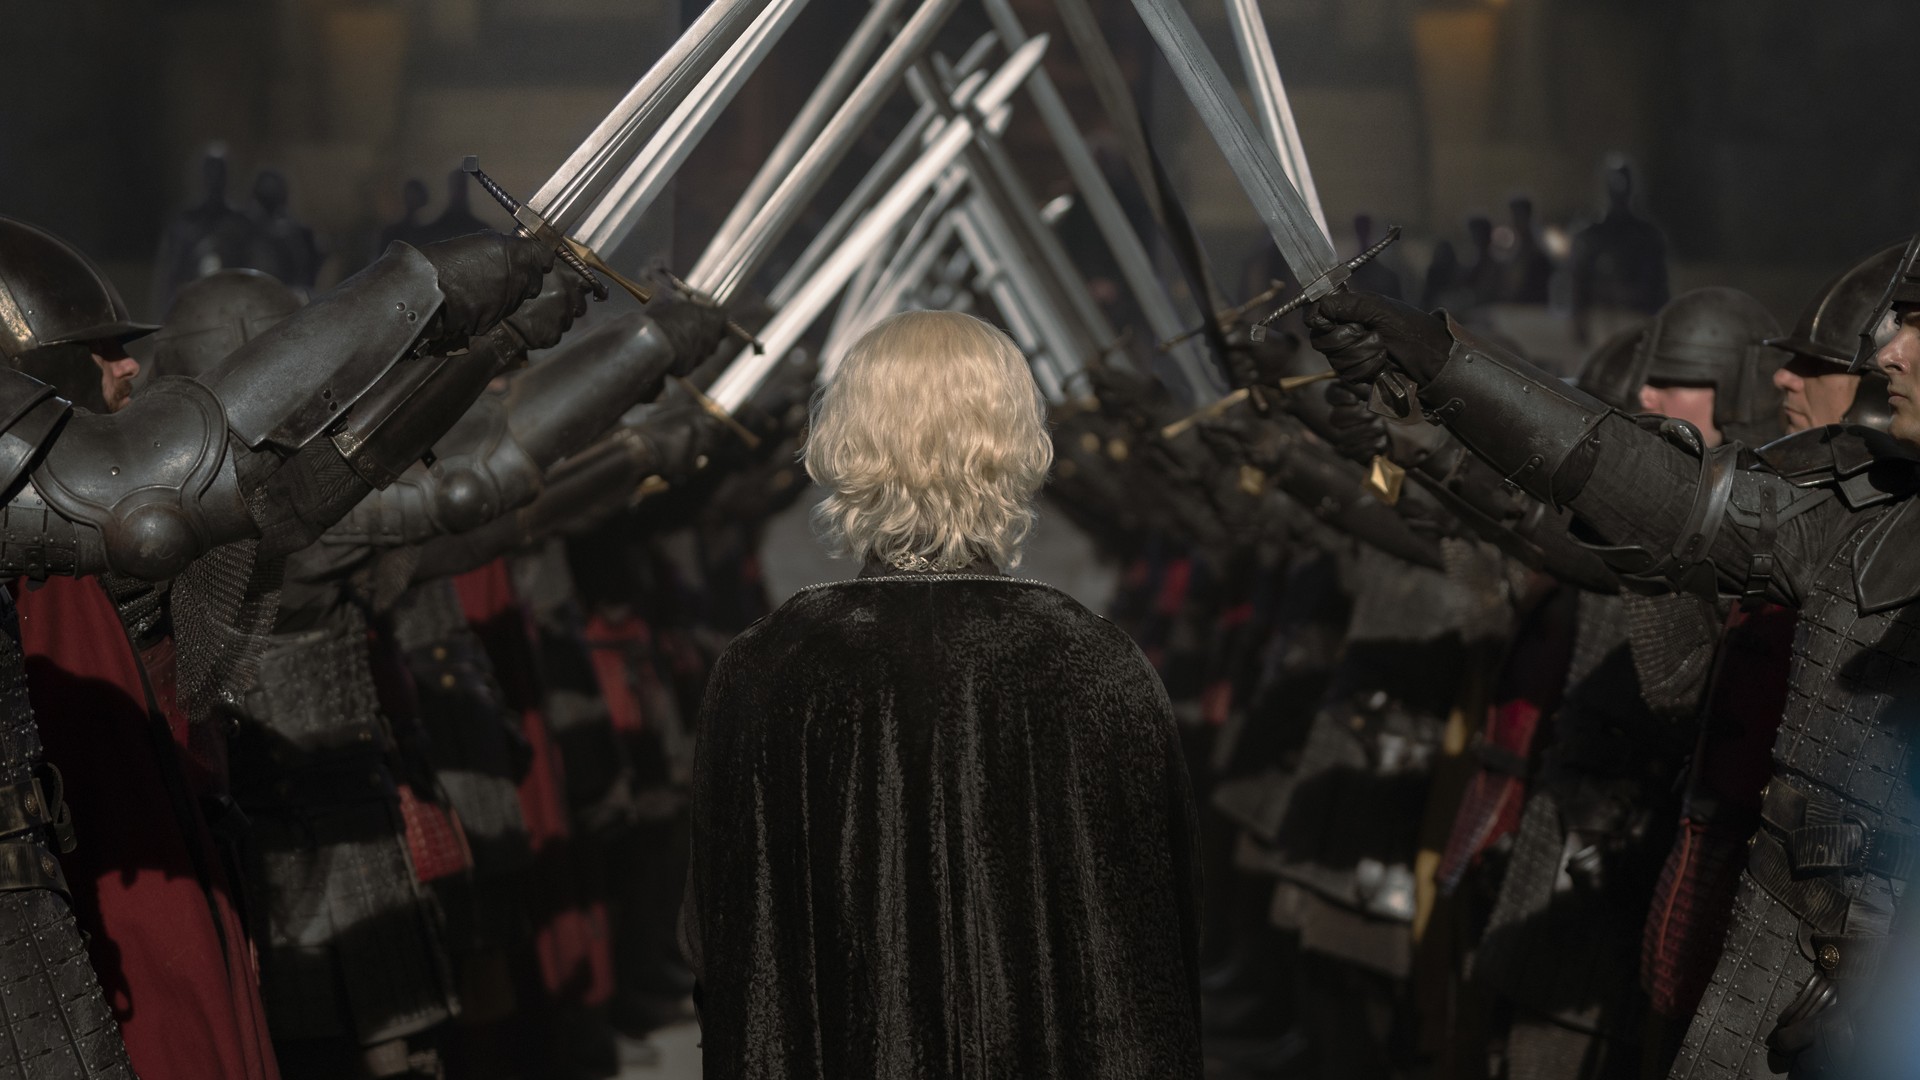 HBO Max's 'The Hedge Knight' Game of Thrones Prequel to Explore Events 90  Years Before Main Series - Focus on Aegon V Targaryen - FandomWire